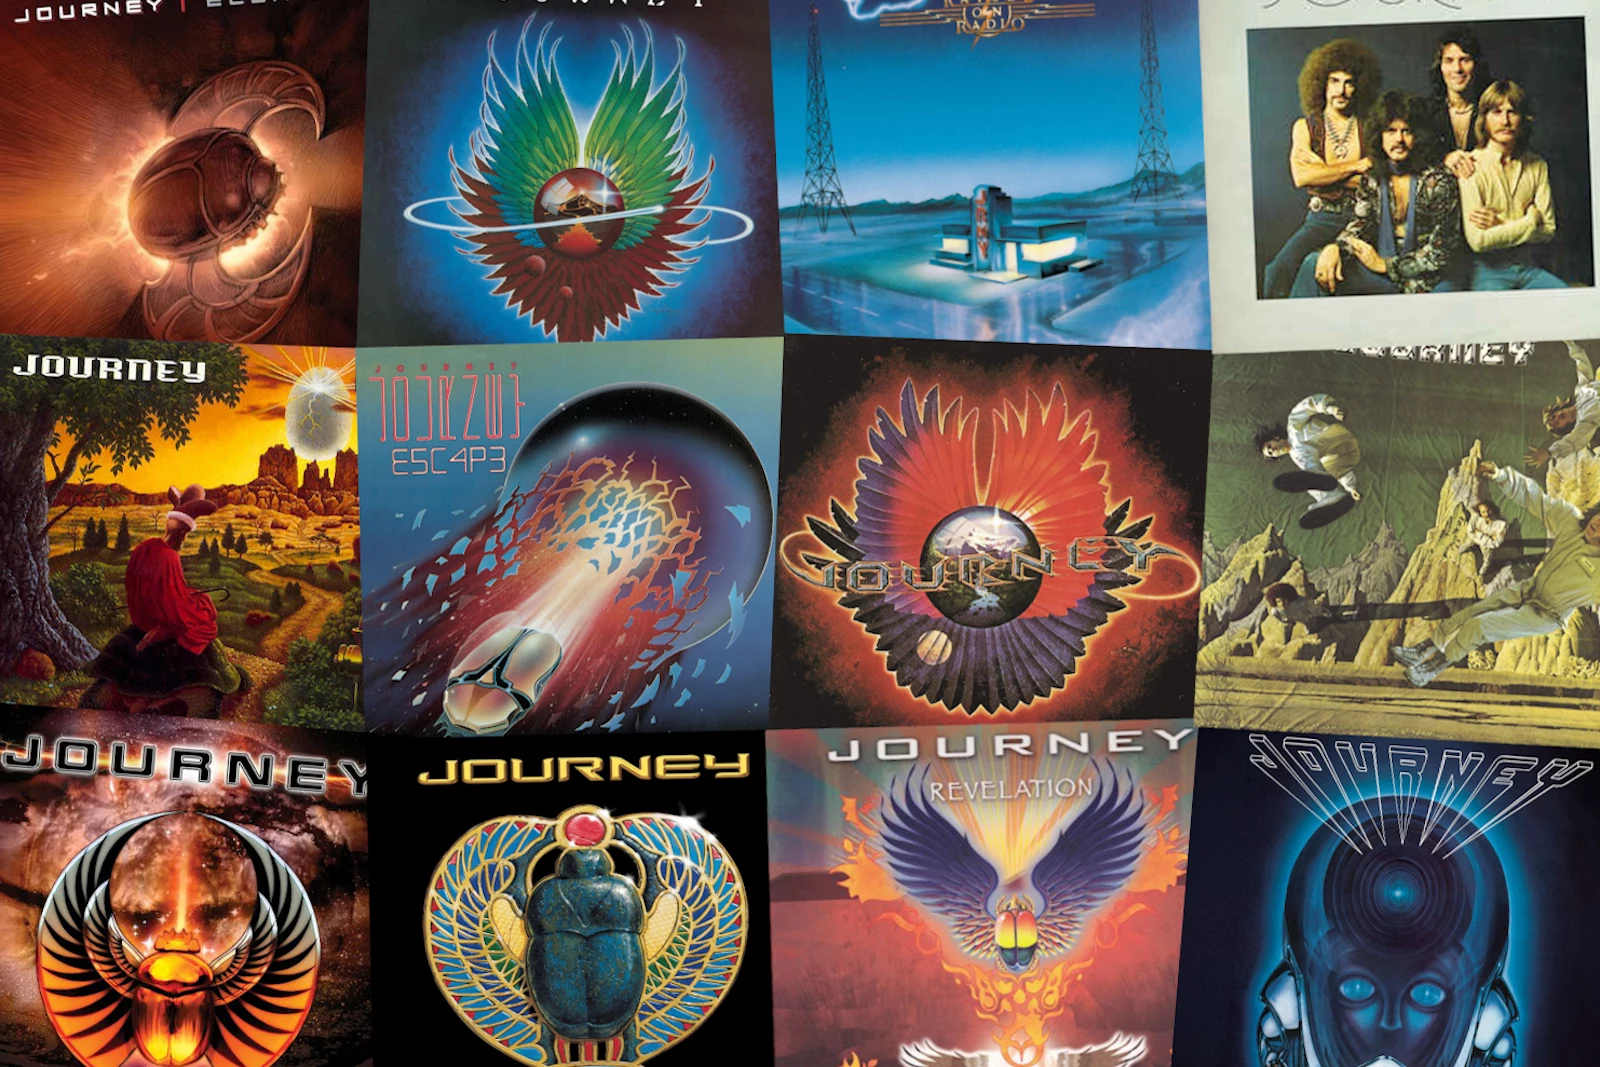 journey album covers meaning